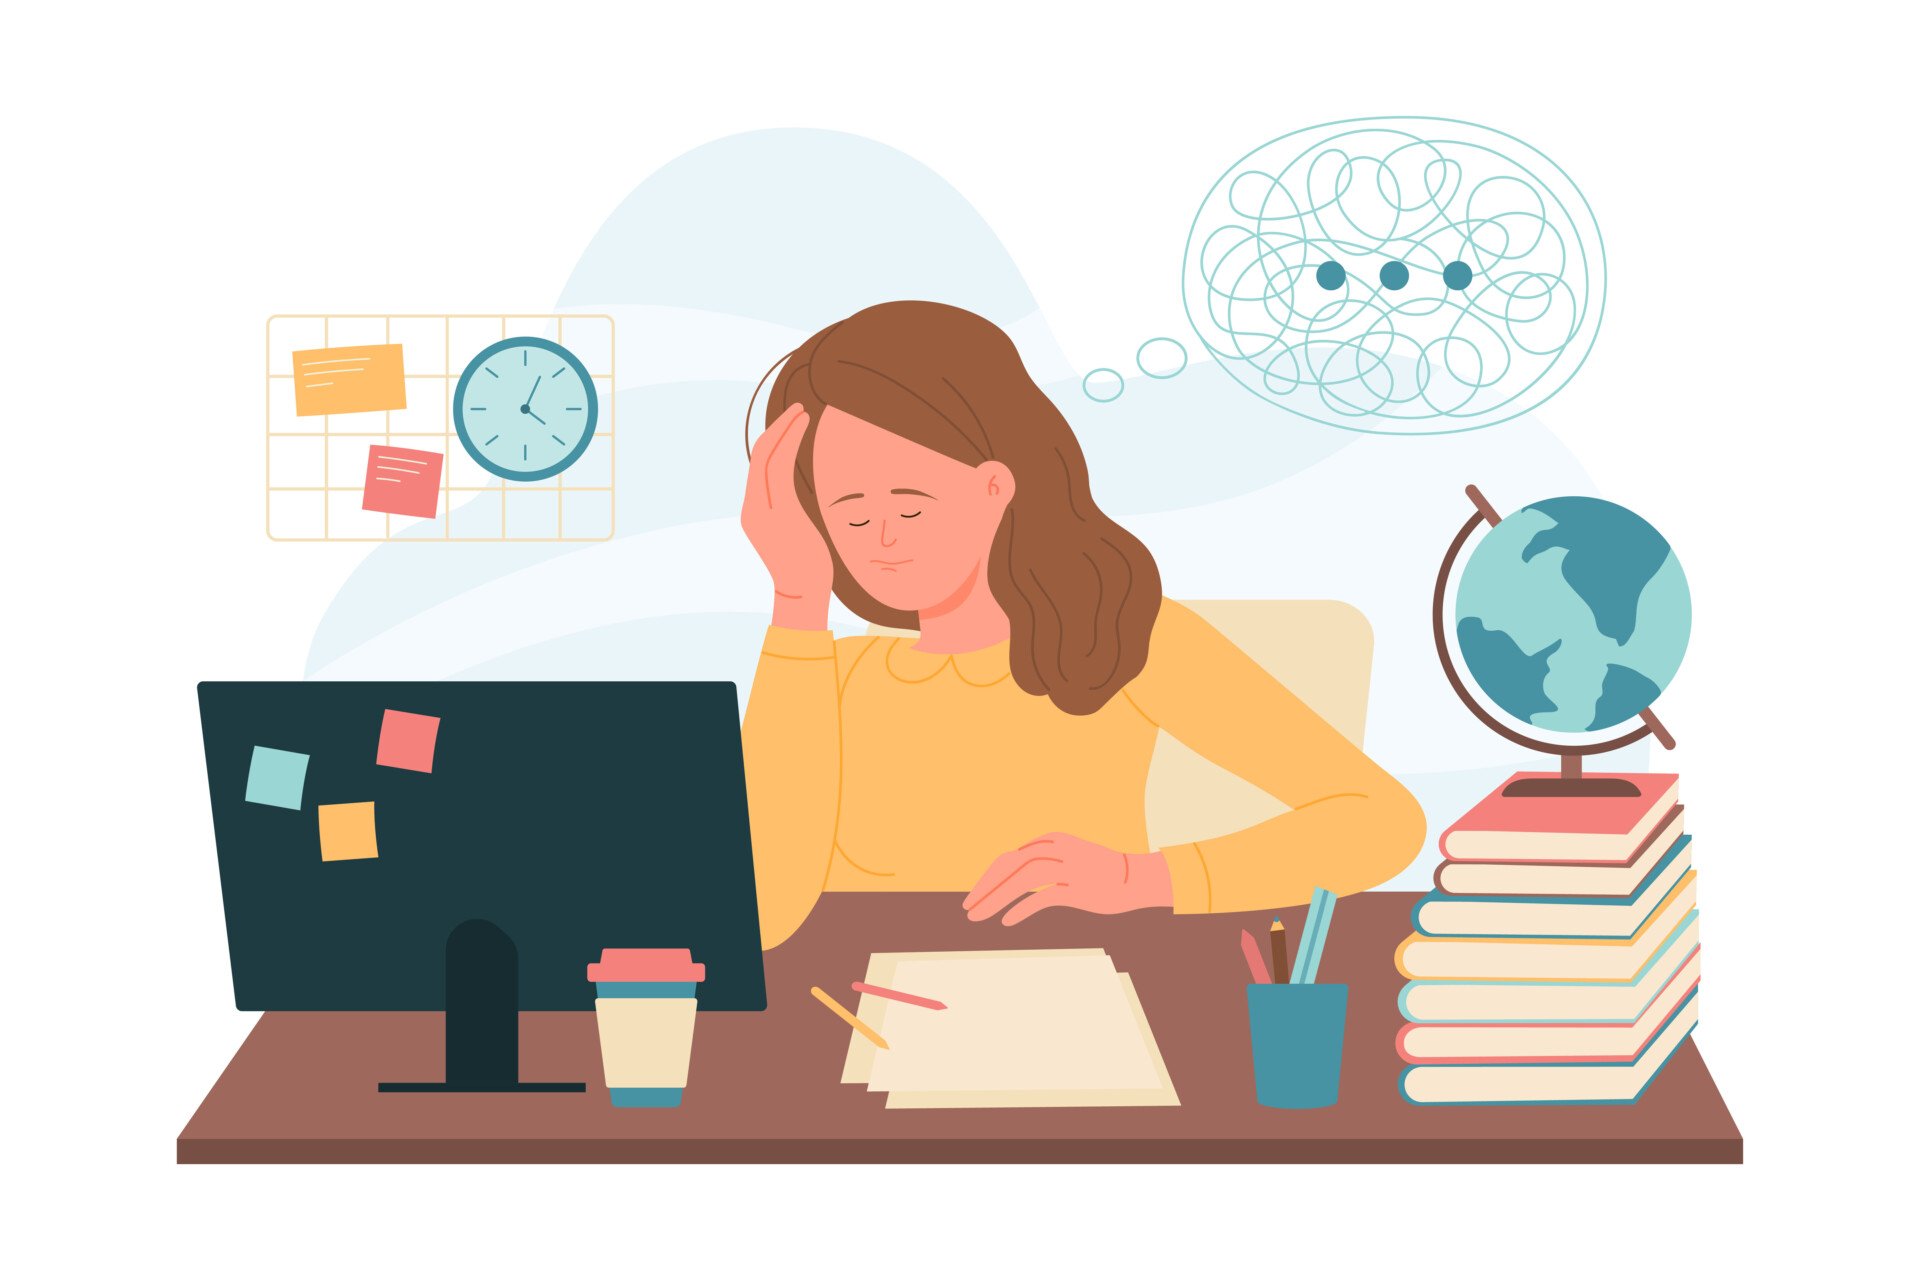 A stressed woman at work desk with books, papers, and a computer screen, with confusion of thoughts over her head.